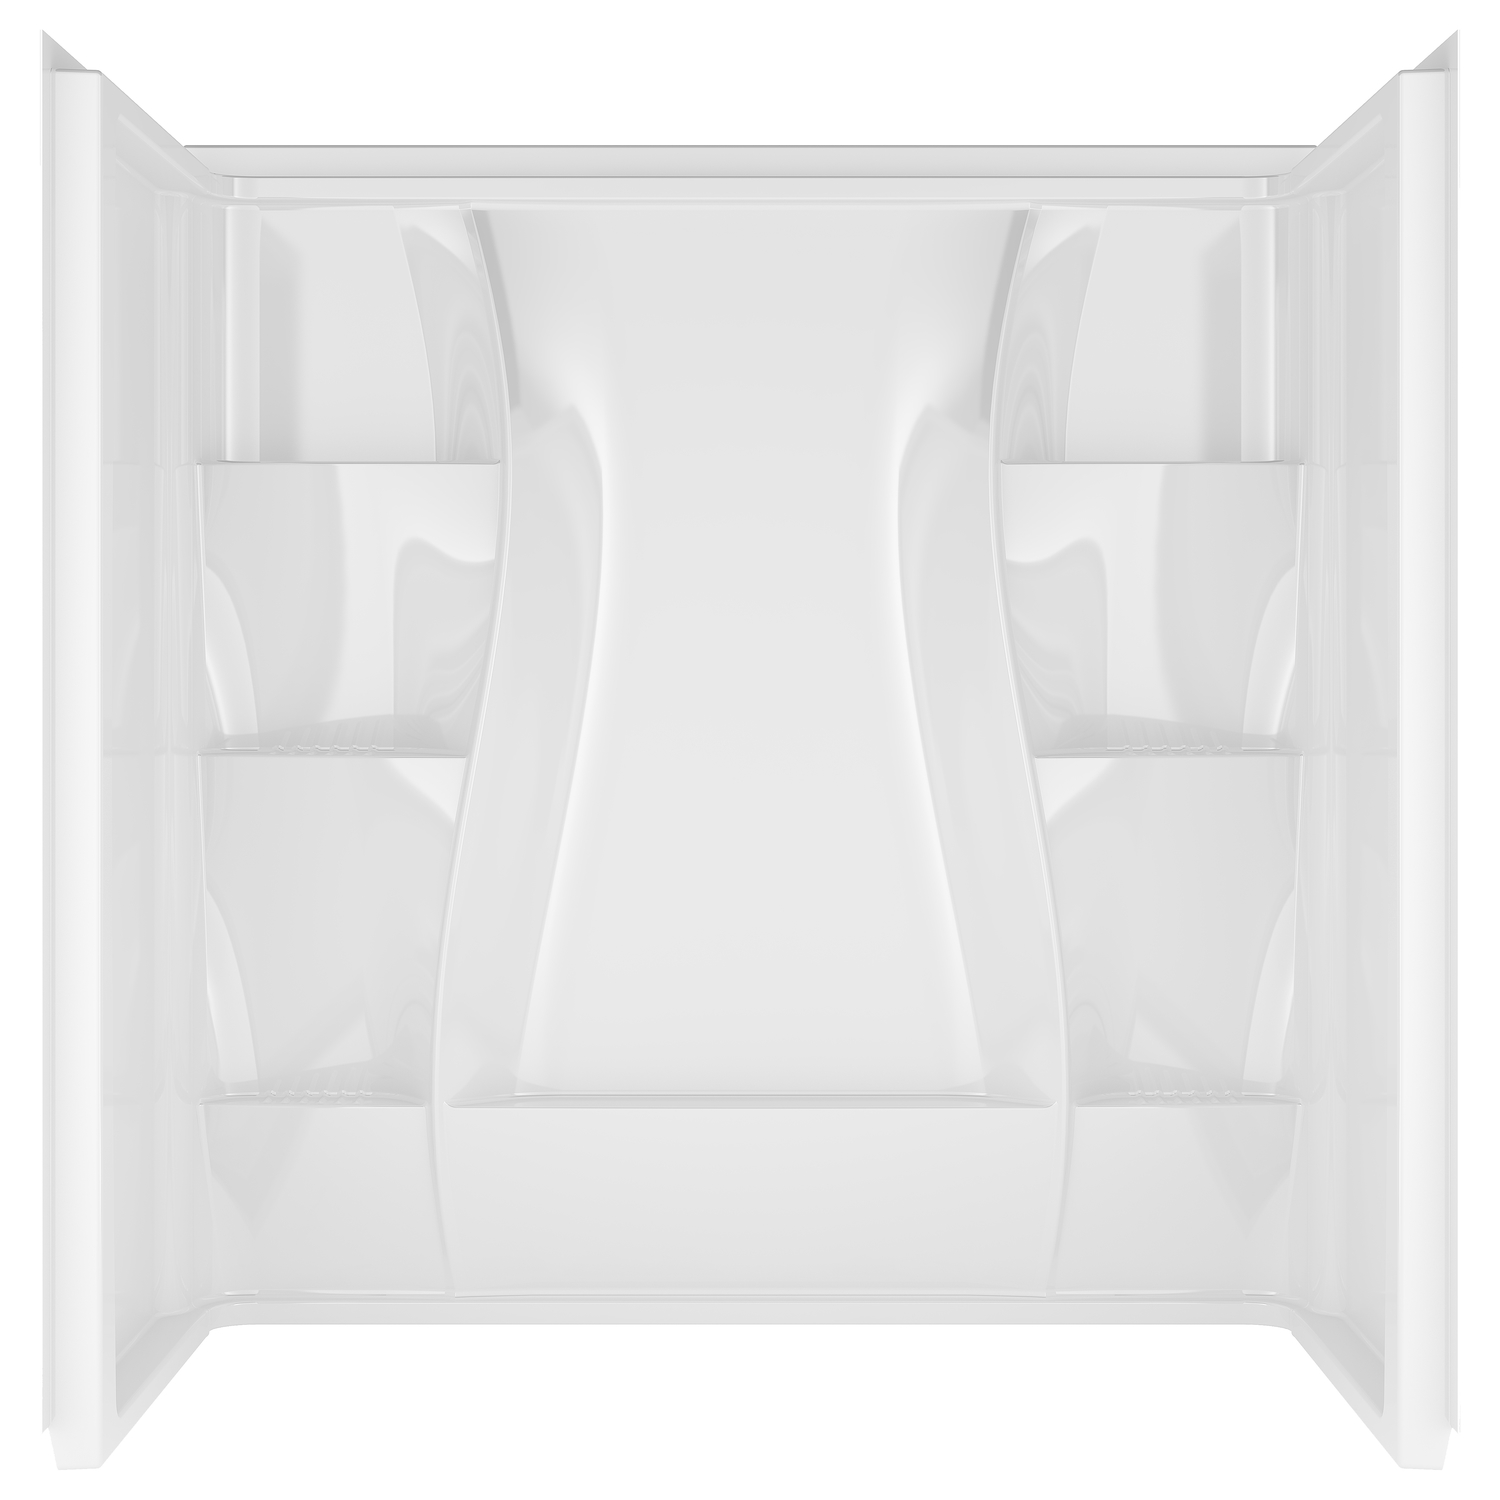 Delta Surround Bathtubs Classic 400 60 in. x 32.5 in. x 61.5 in. 3-piece Direct-to-Stud Tub Surround in White 40044